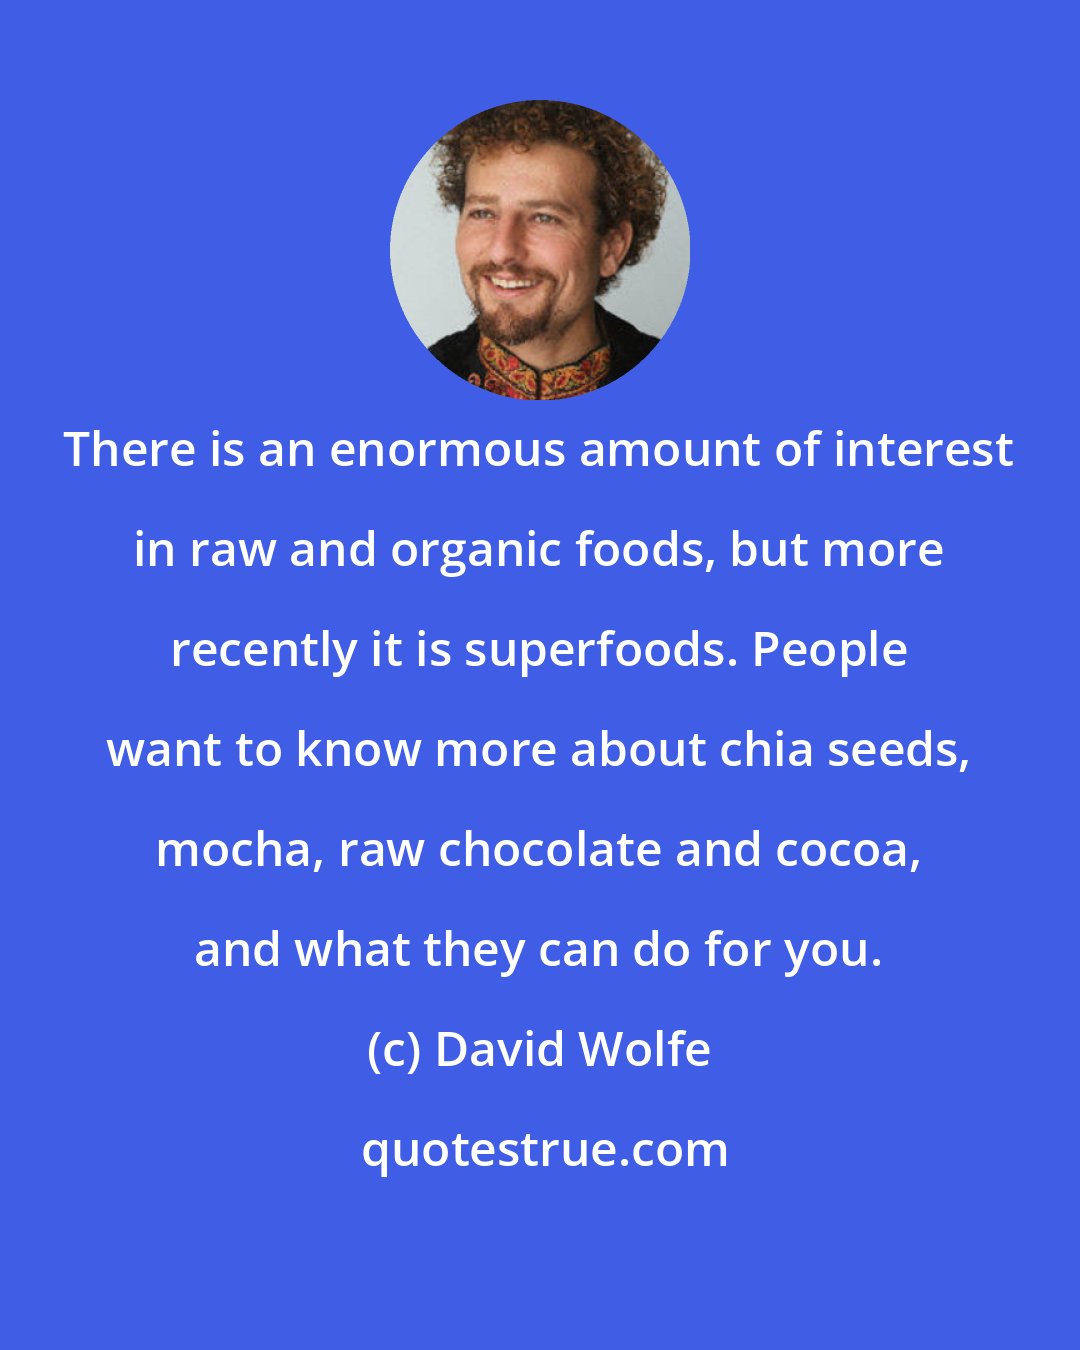 David Wolfe: There is an enormous amount of interest in raw and organic foods, but more recently it is superfoods. People want to know more about chia seeds, mocha, raw chocolate and cocoa, and what they can do for you.